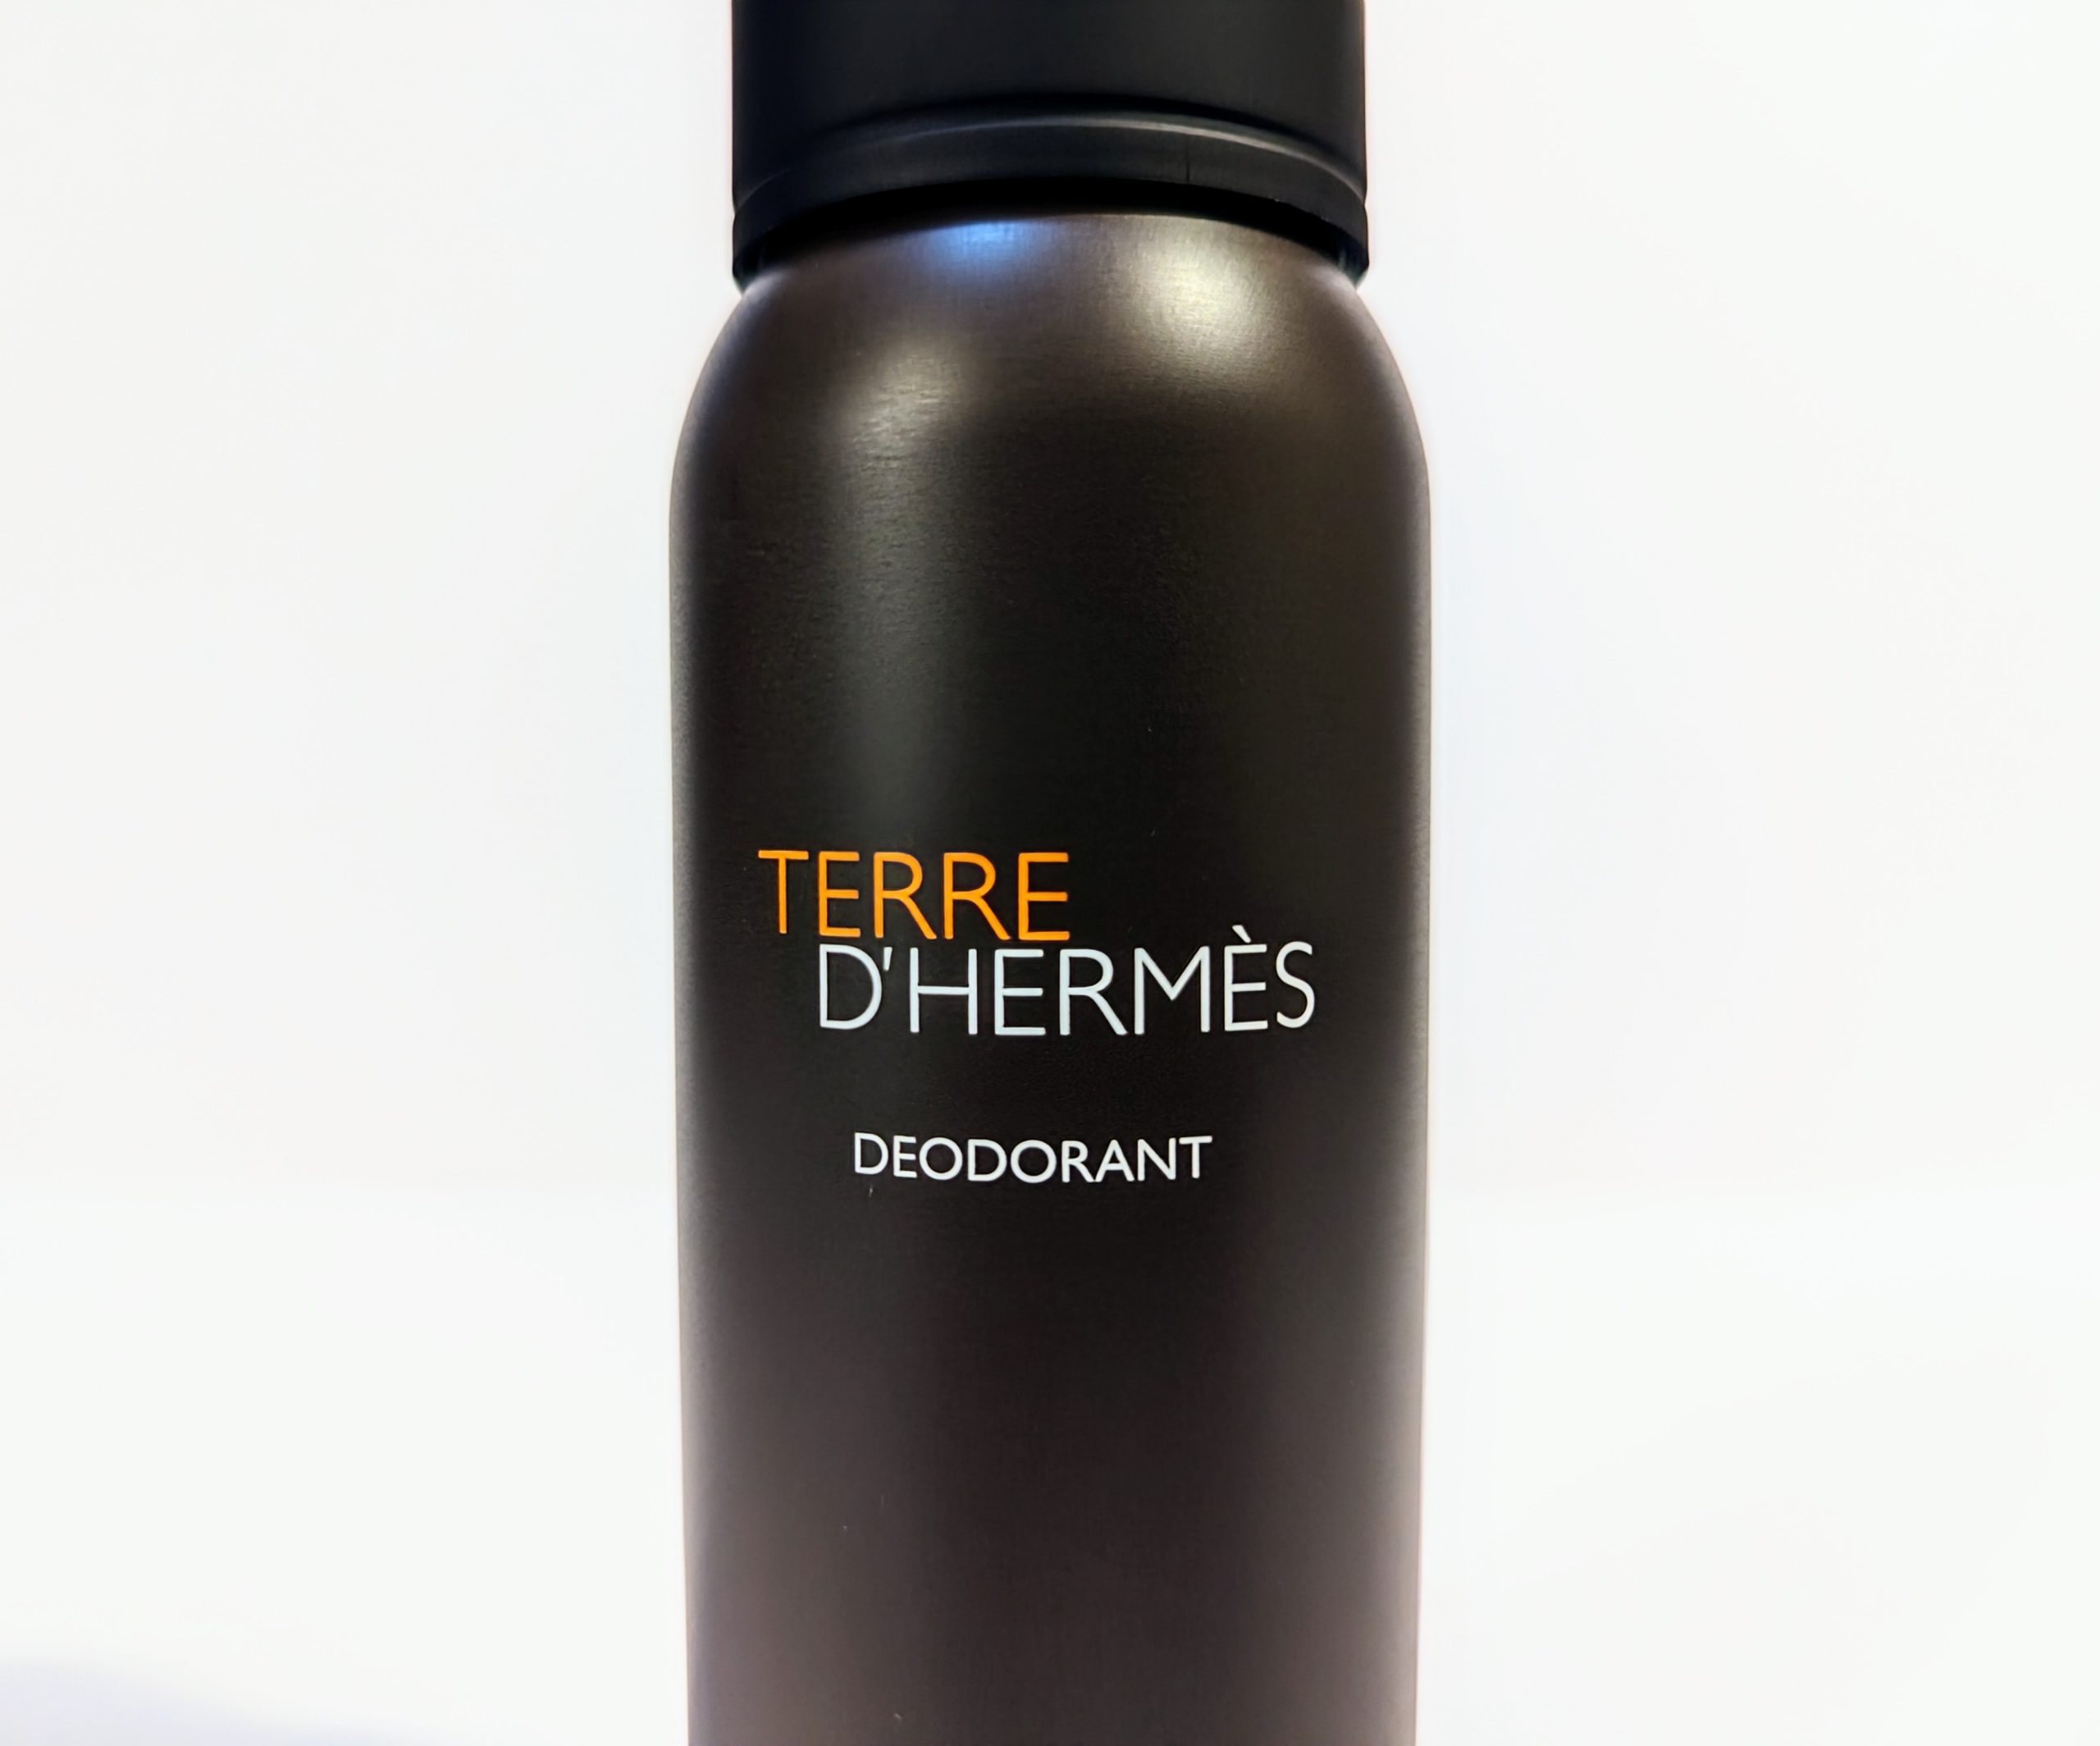 A bottle of Terre d’Hermès deodorant with a black cap and a brown cylindrical body with the brand name printed in orange and white.